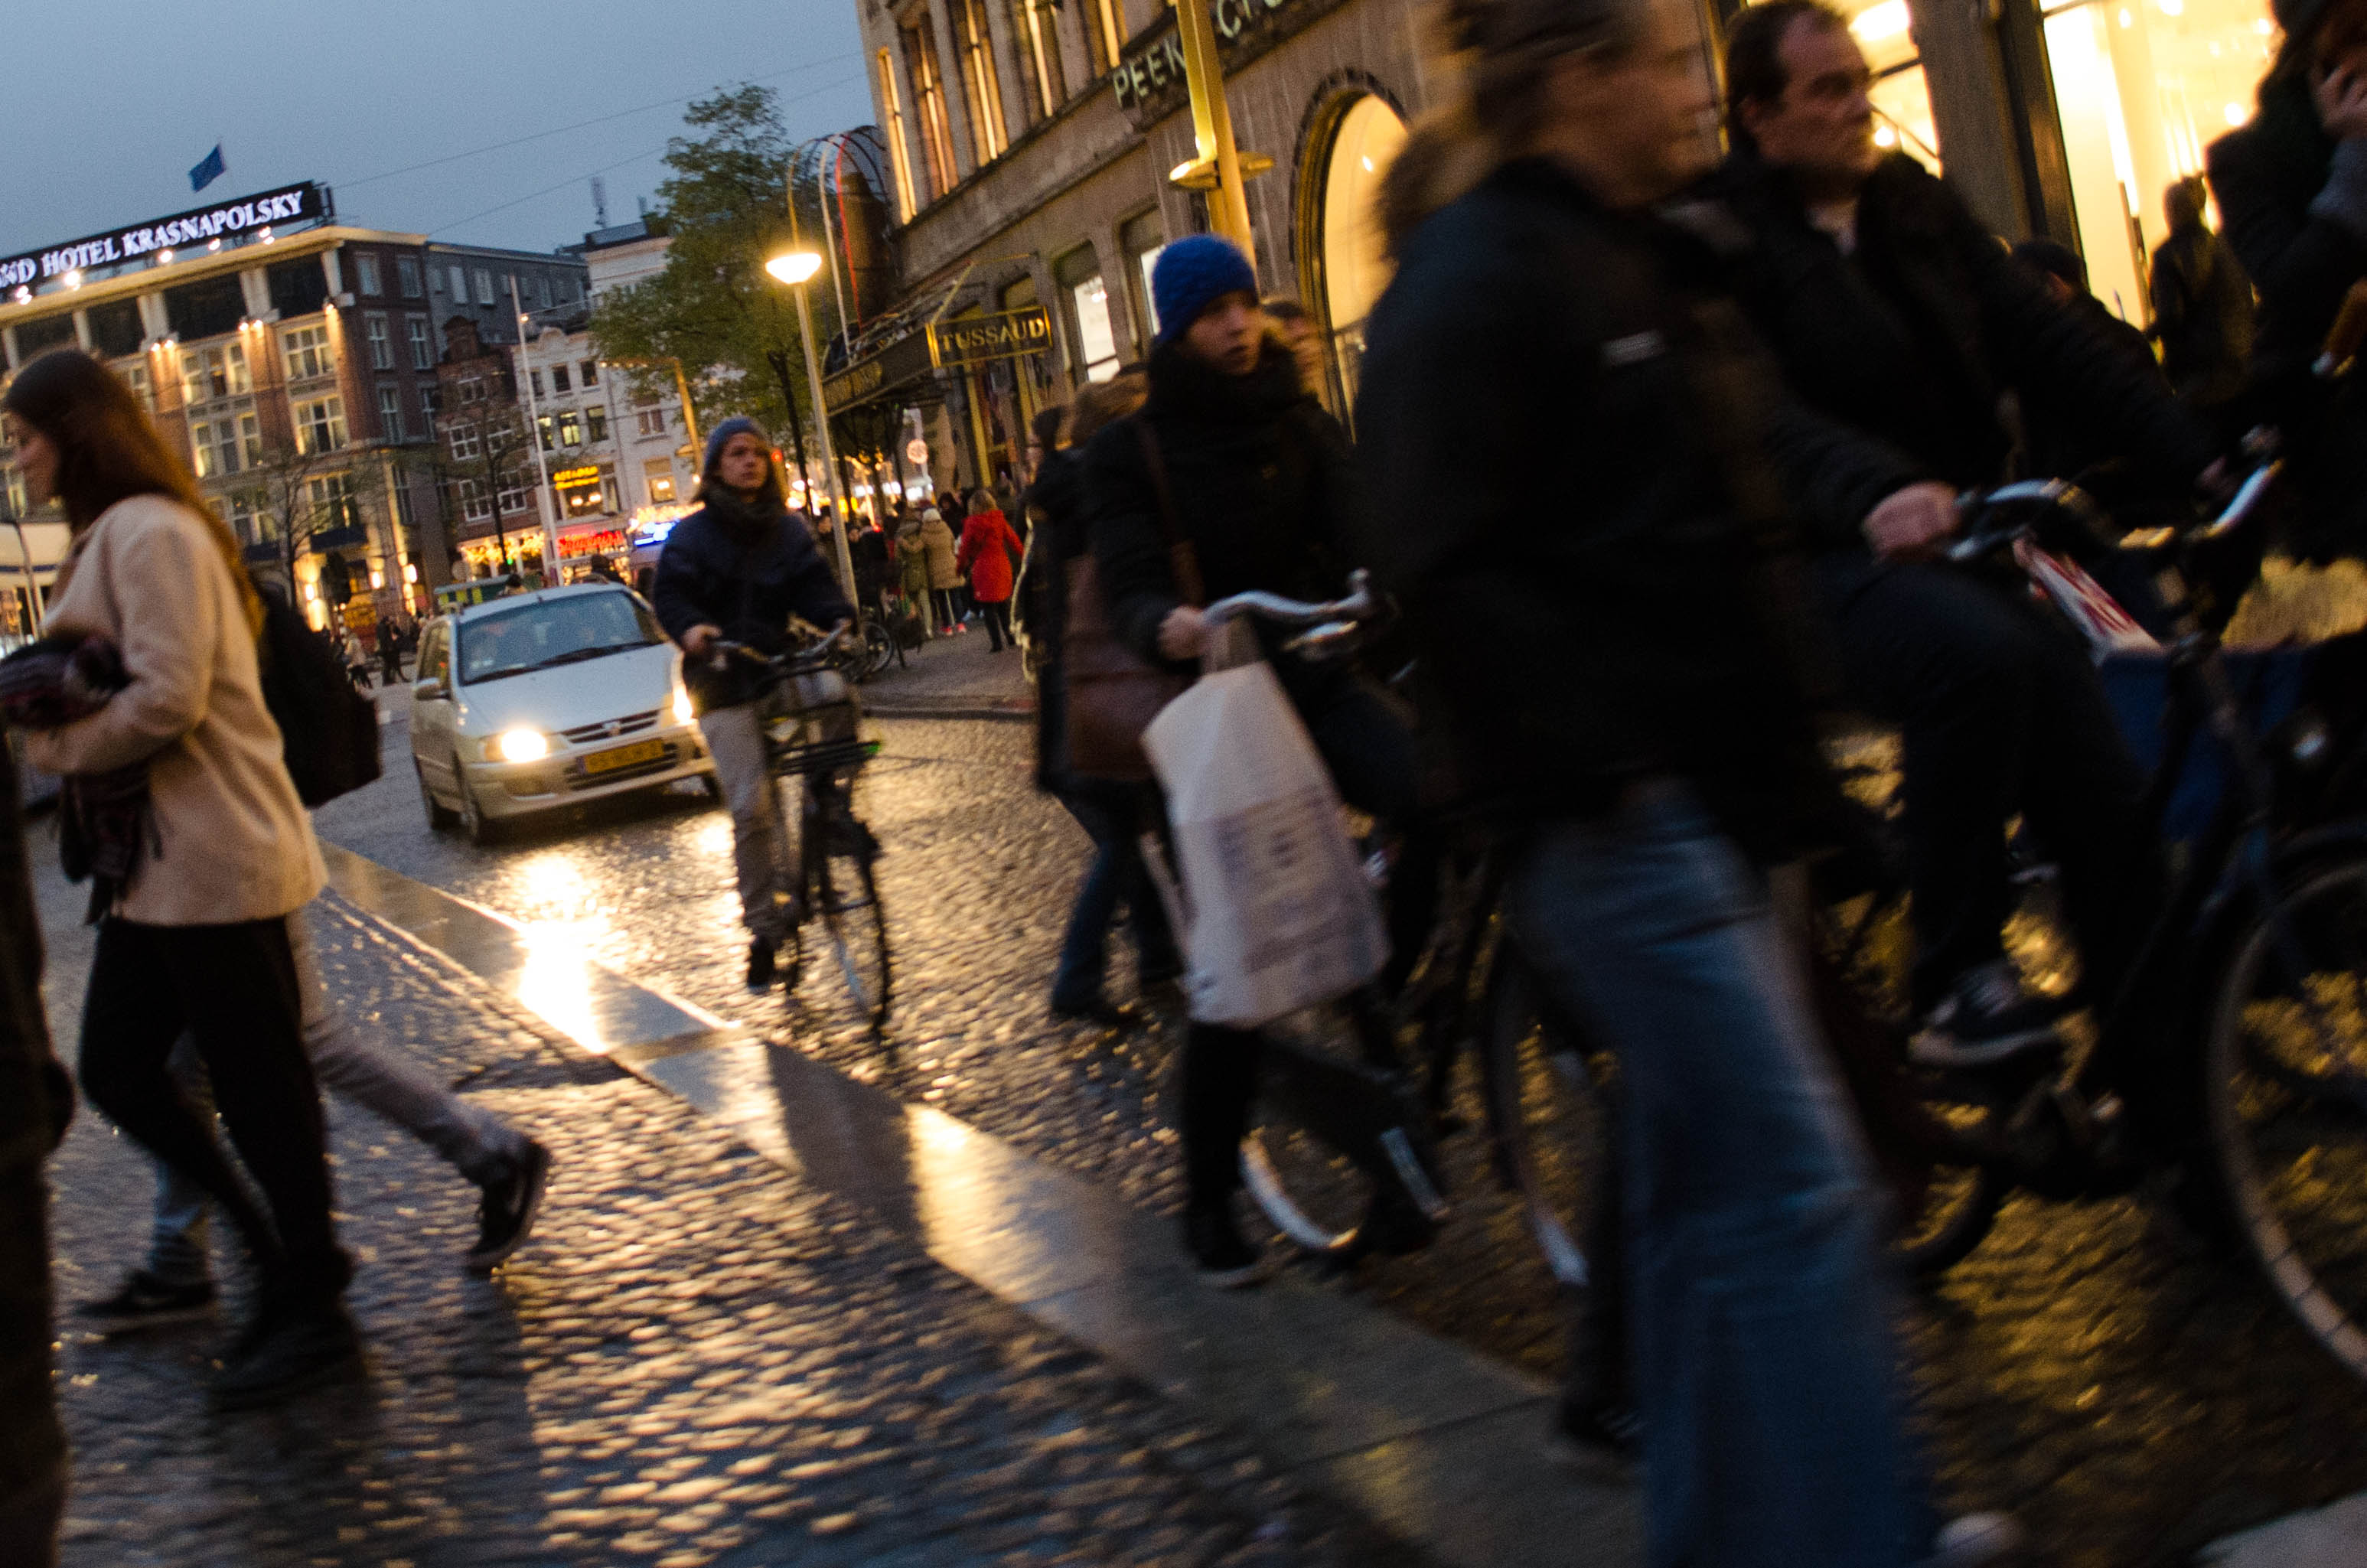 cyclists and pedestrians attempt to navigate the busy street in Dam Square Amsterdam